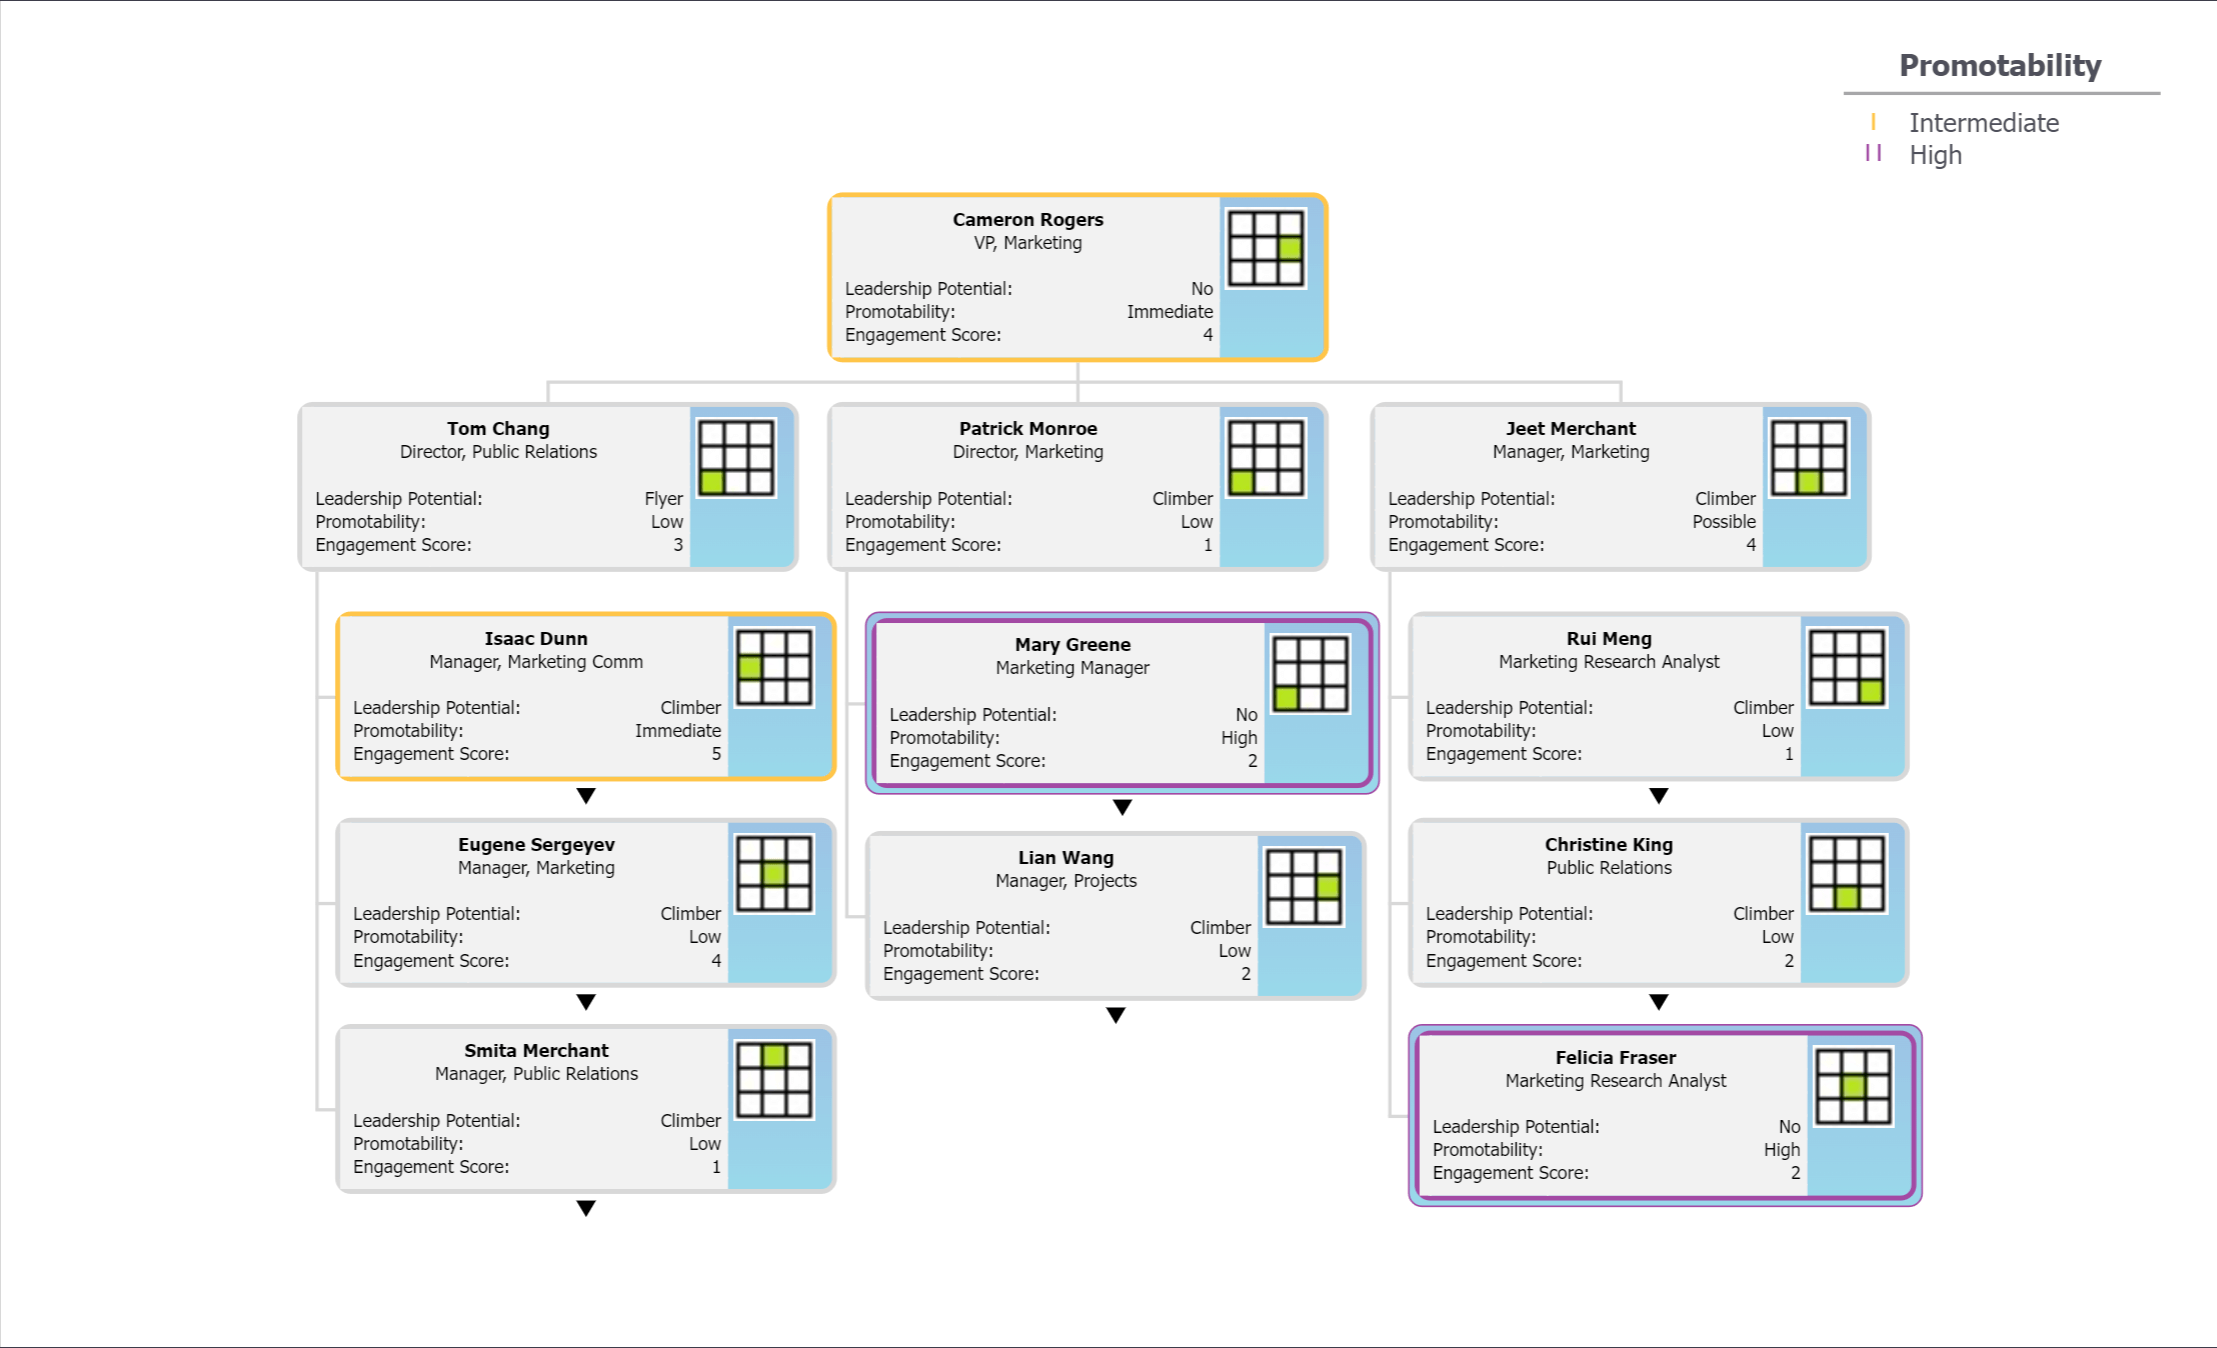 9-Box Org Chart with Promotability